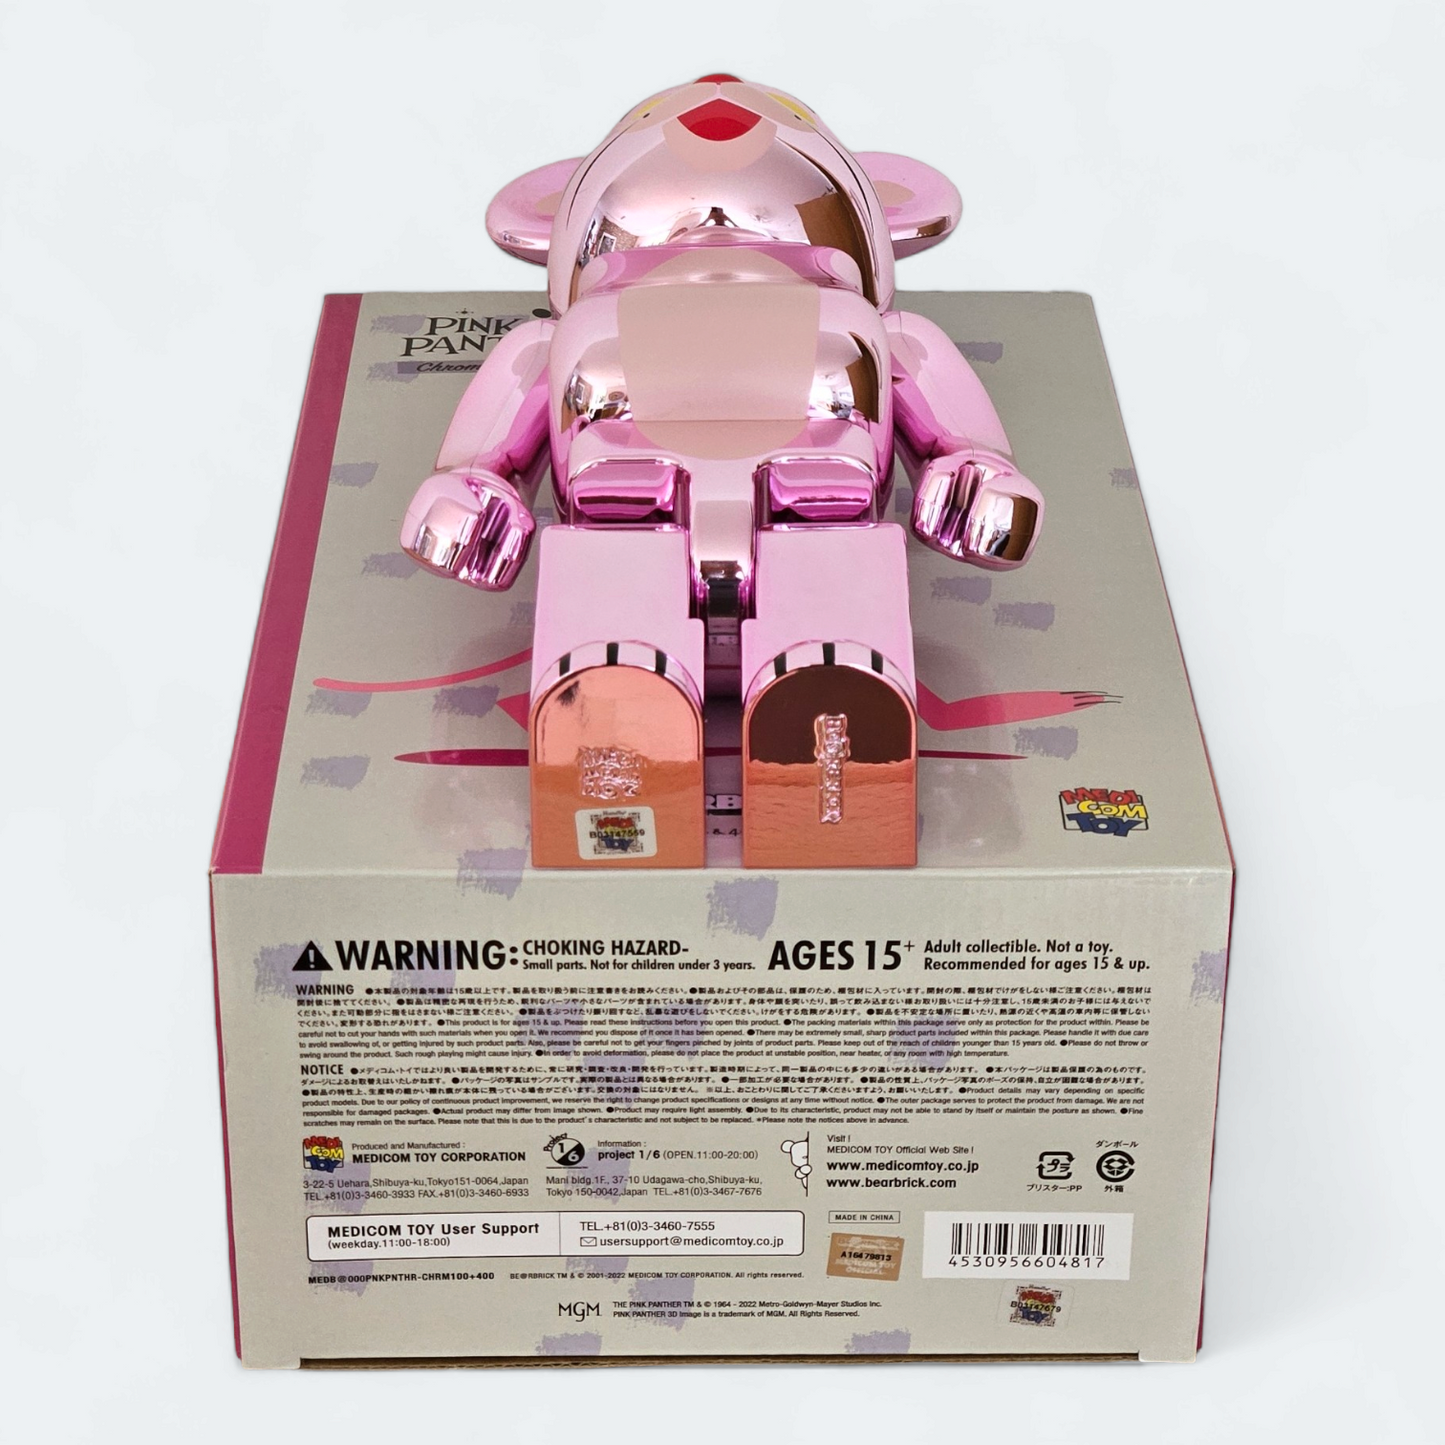 BE@RBRICK Pink Panther Chrome Version (100%+400%)